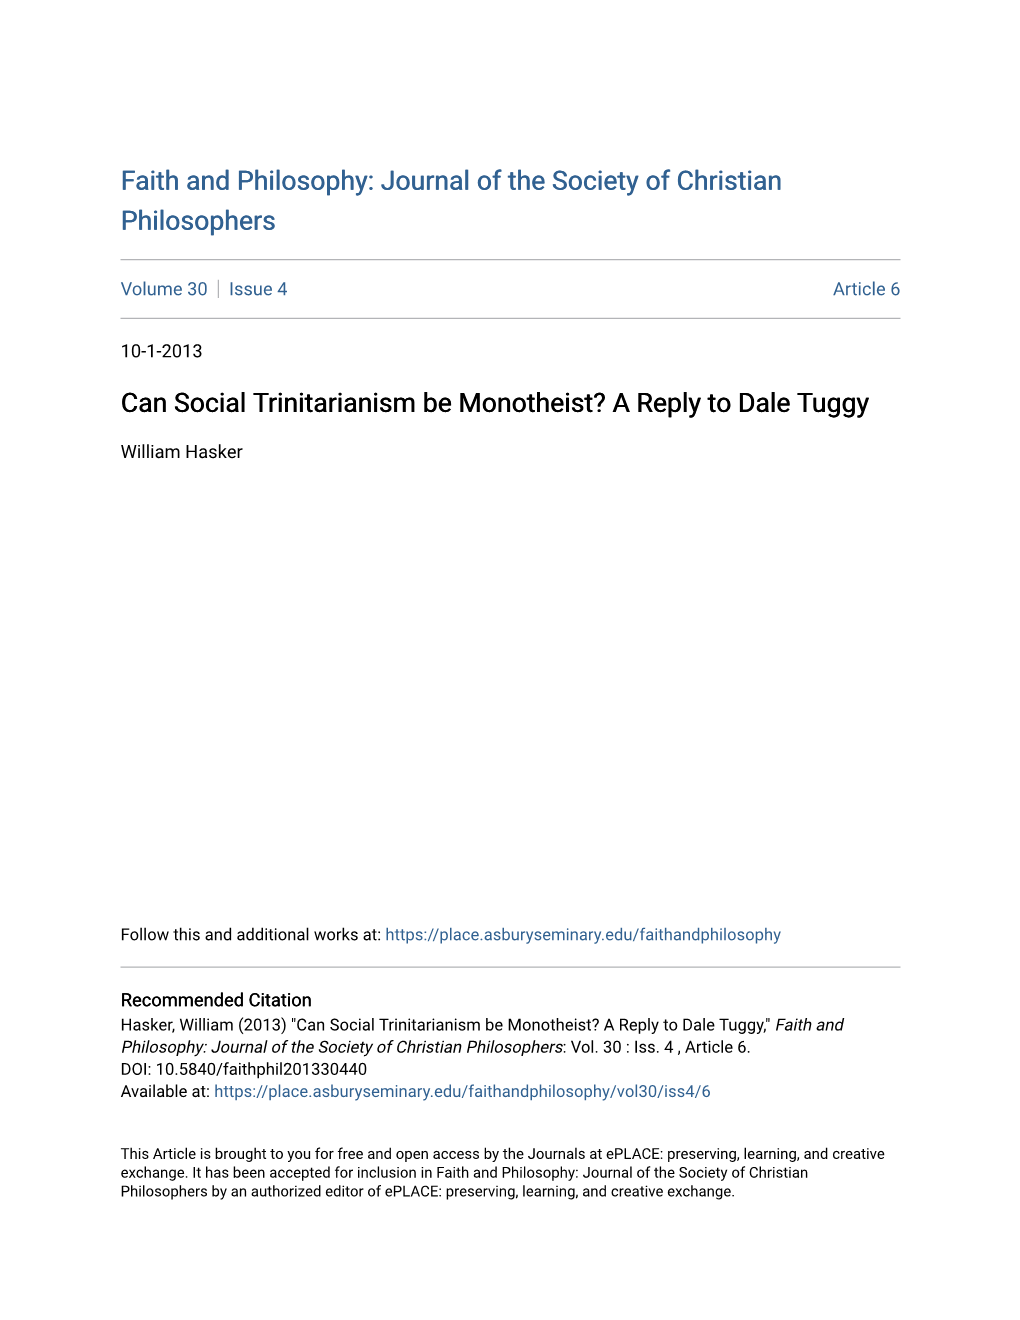 Can Social Trinitarianism Be Monotheist? a Reply to Dale Tuggy